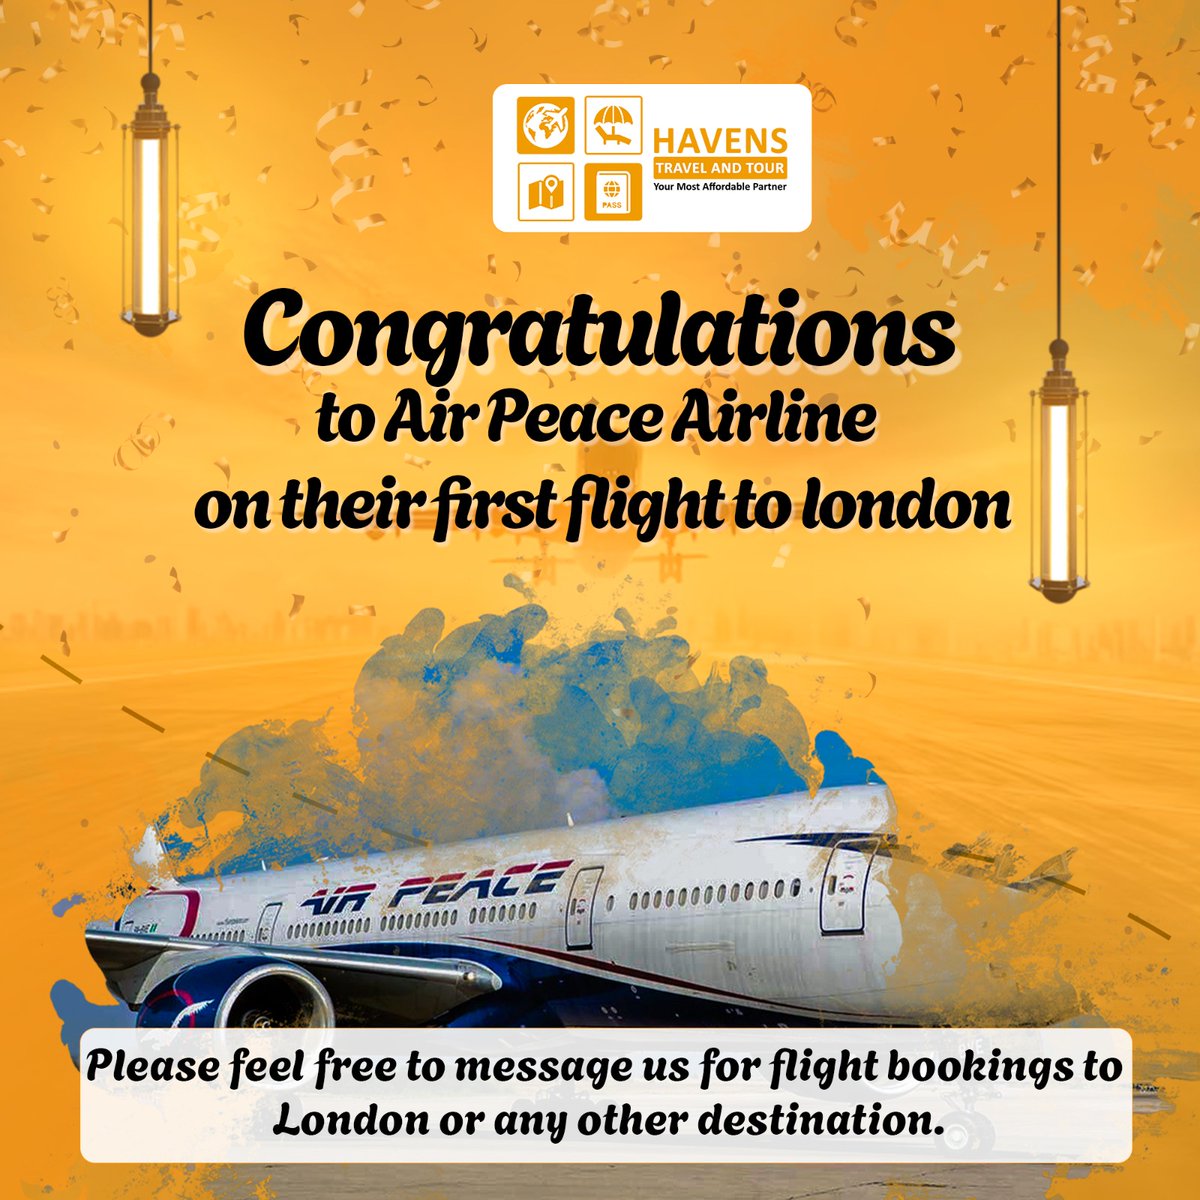 Congratulations to Air Peace Airline on their inaugural flight to London!

#AirPeace #londonflight #FlightDeals #flightreservation